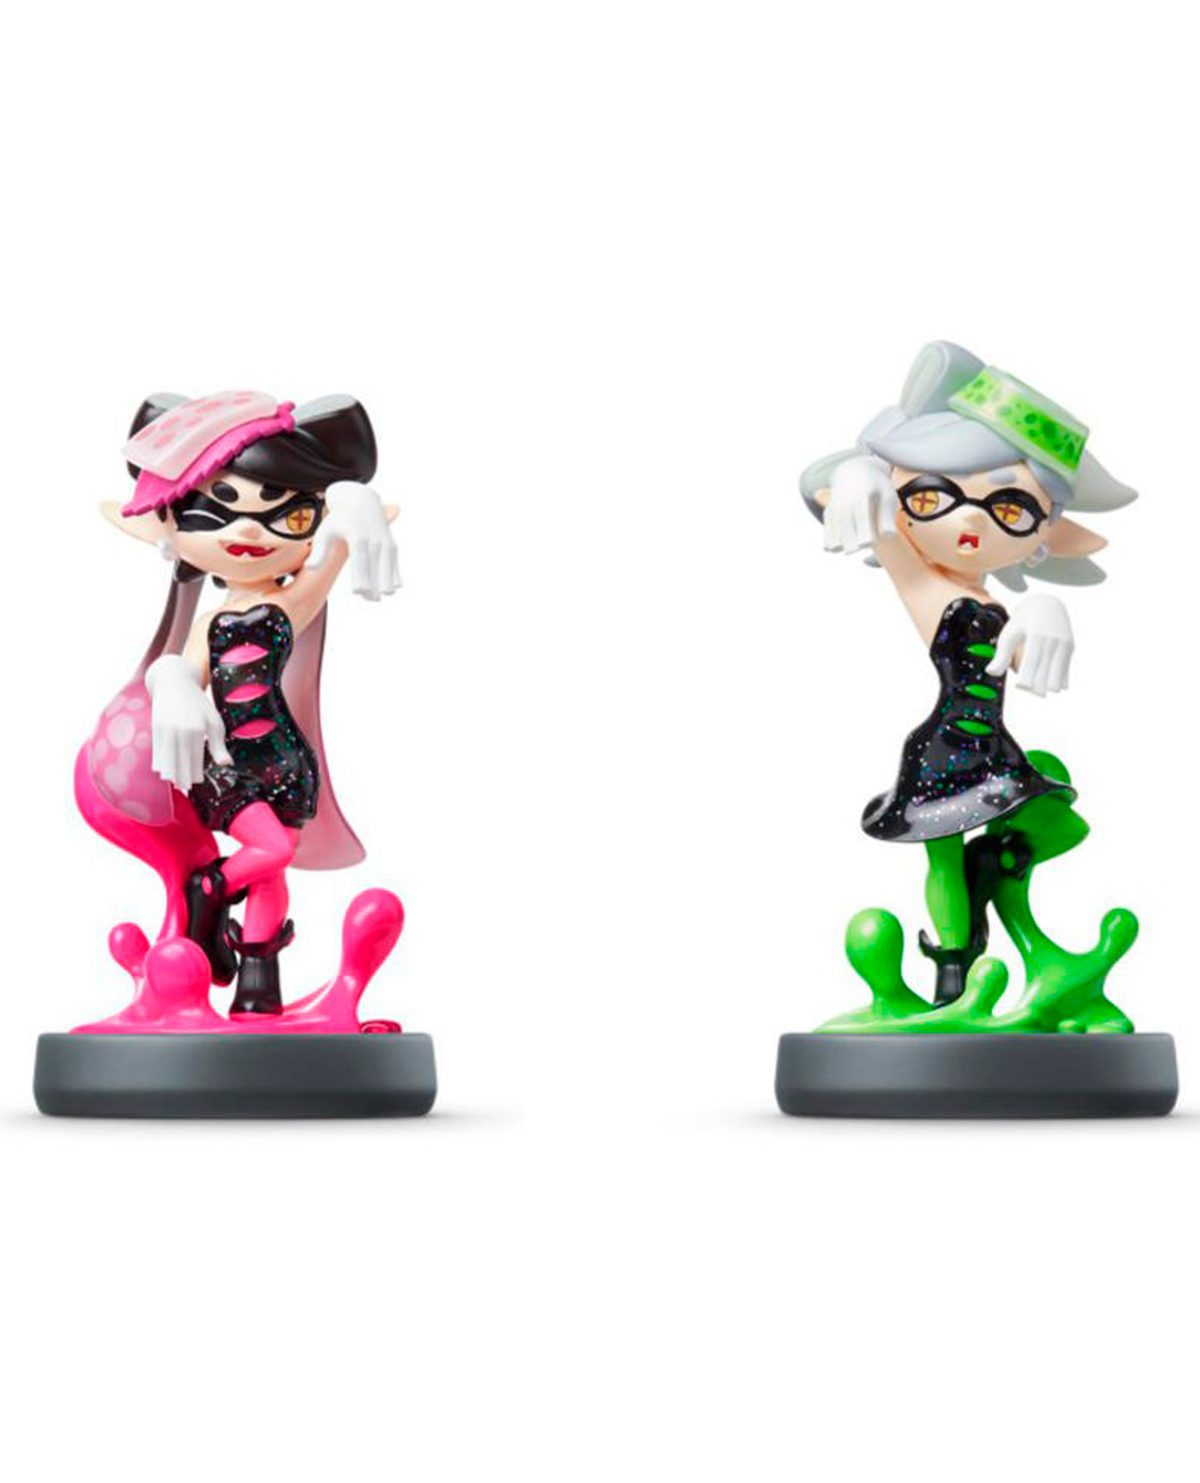 AMIBO CALLIE AND MARIE 2 PCK